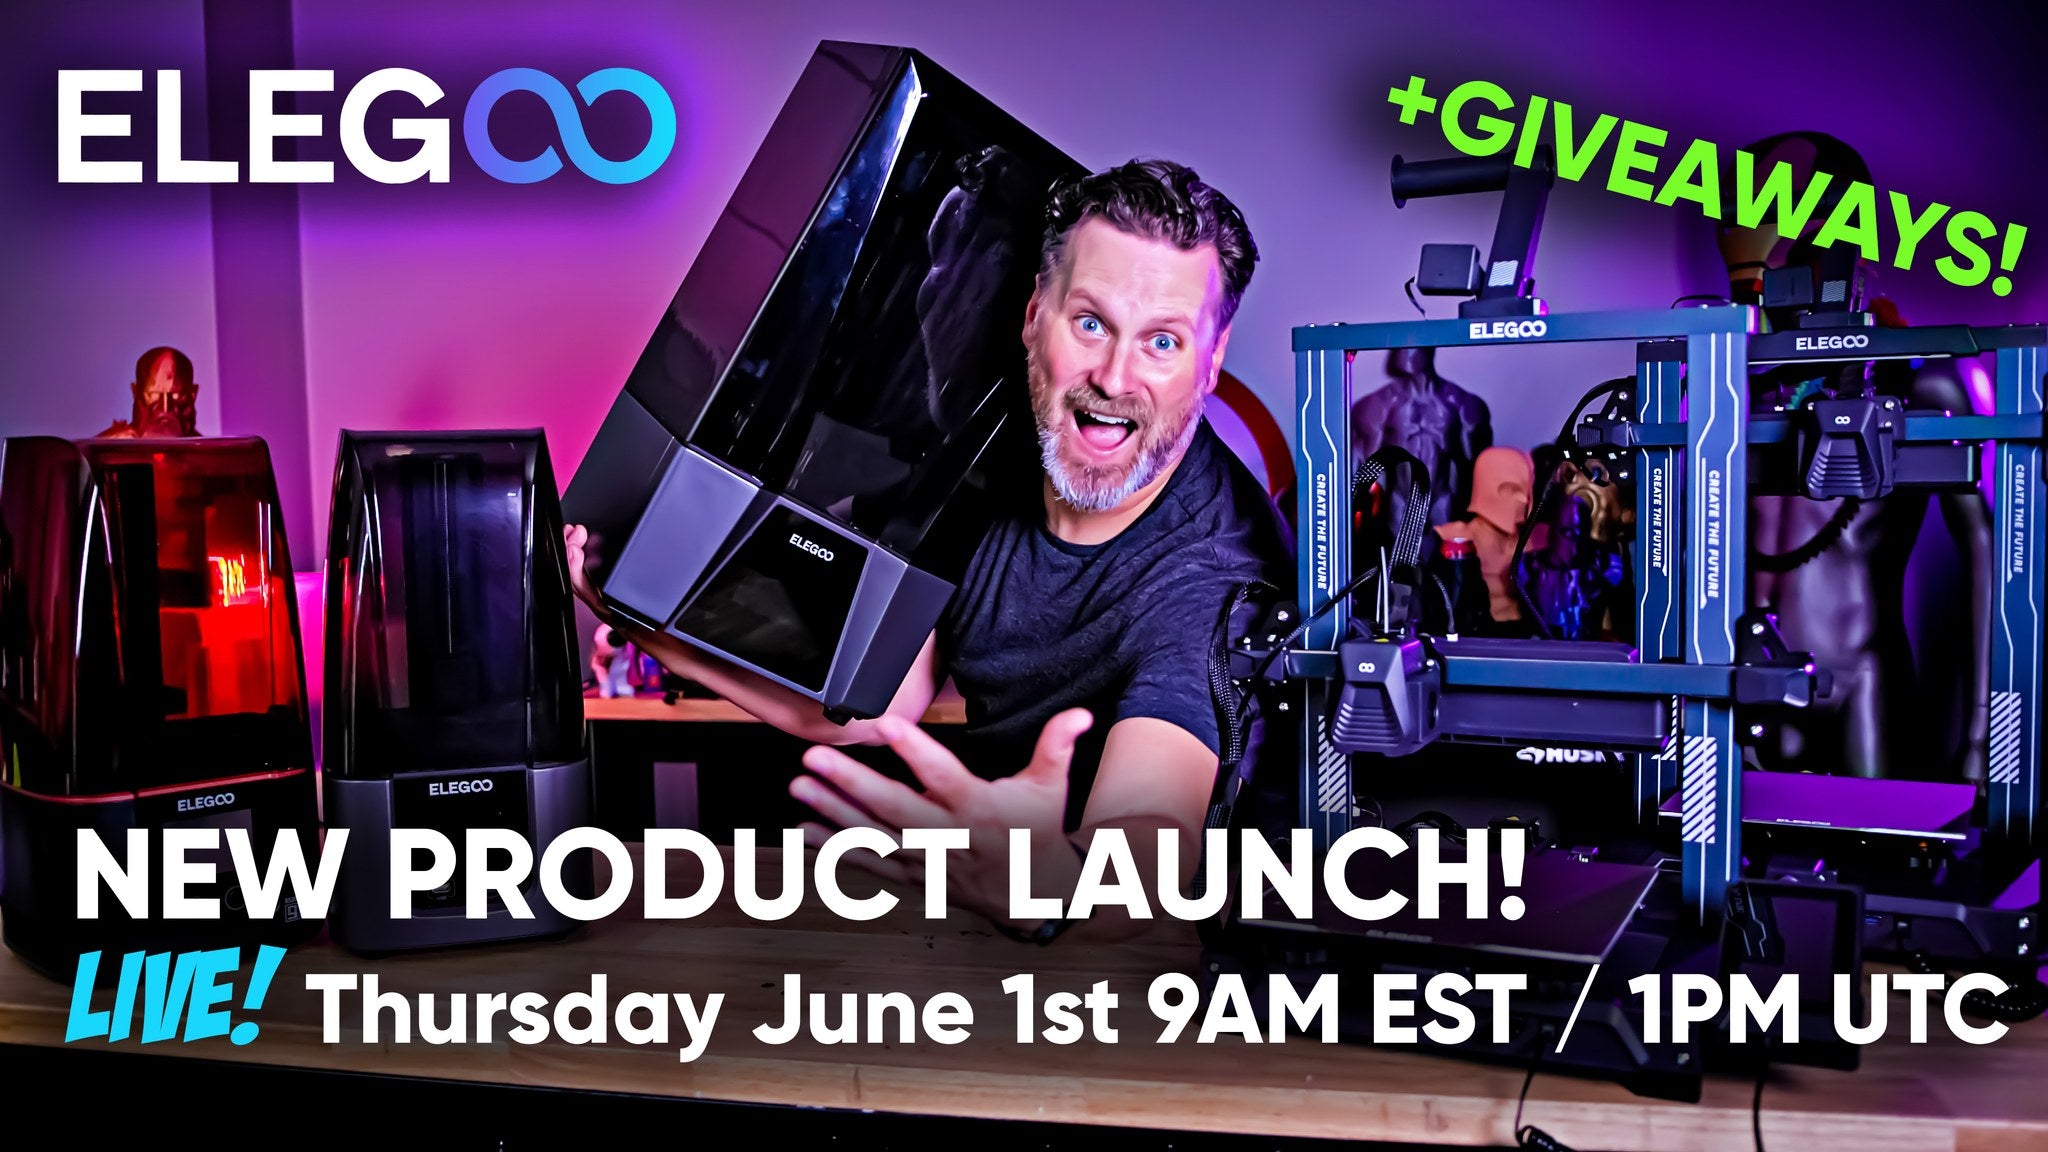 Join Live Stream and Win Prizes Worth $ 10, 000!